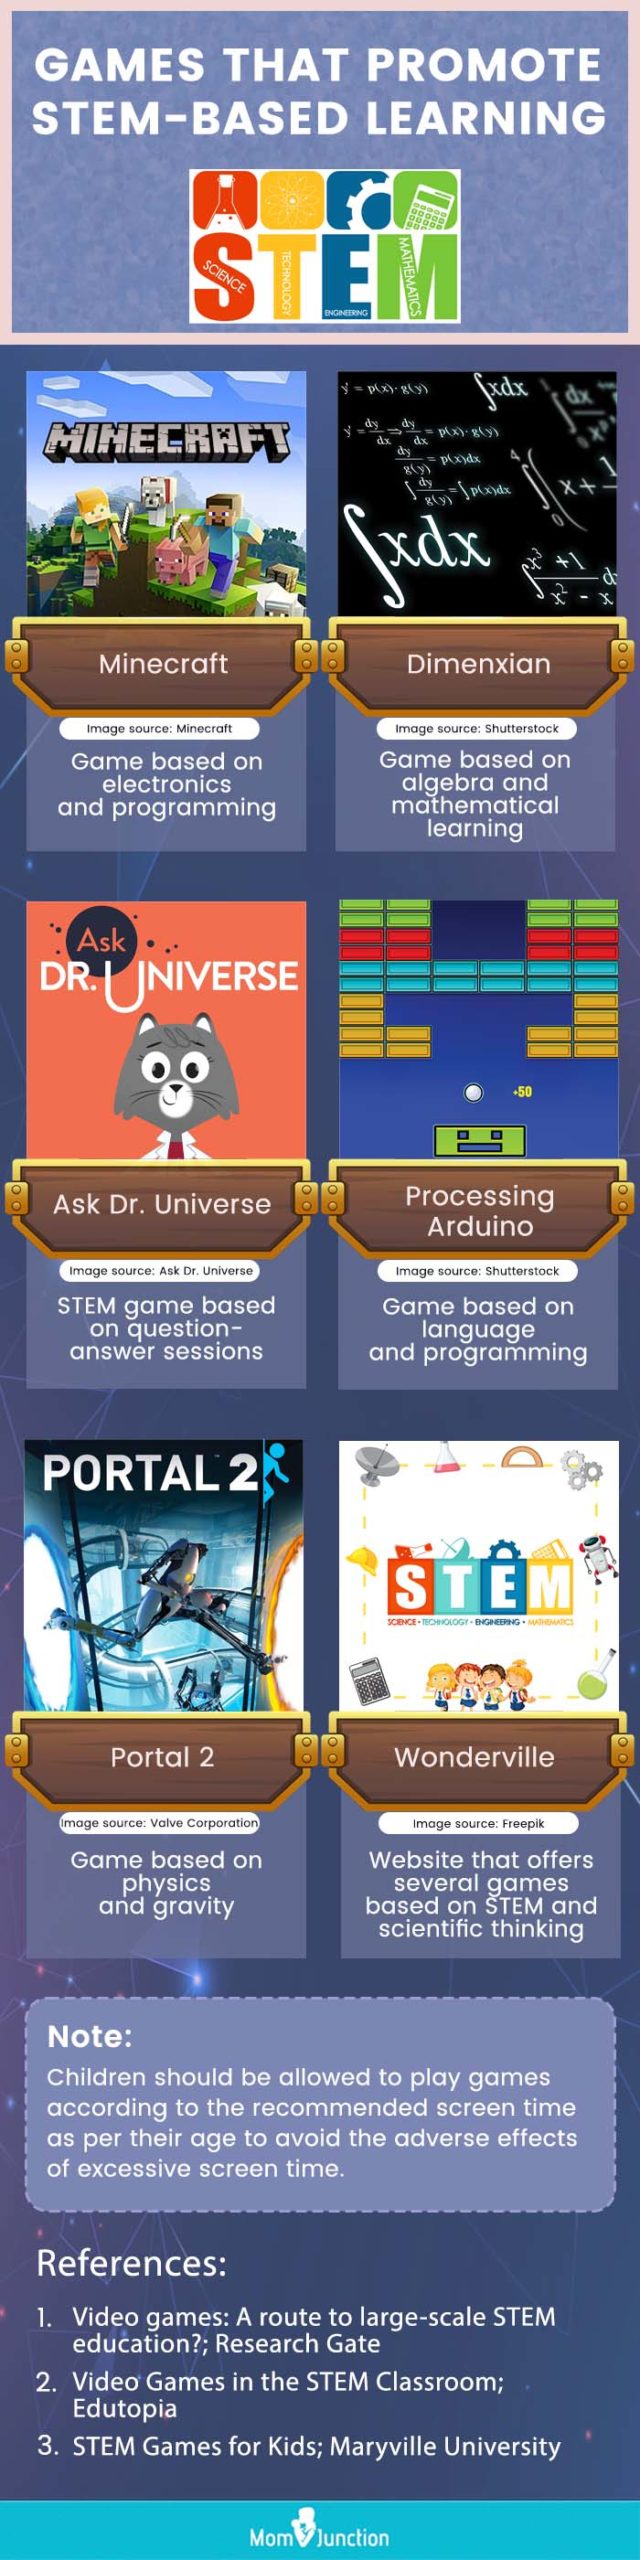 games that promote stem based learning for kids (infographic)